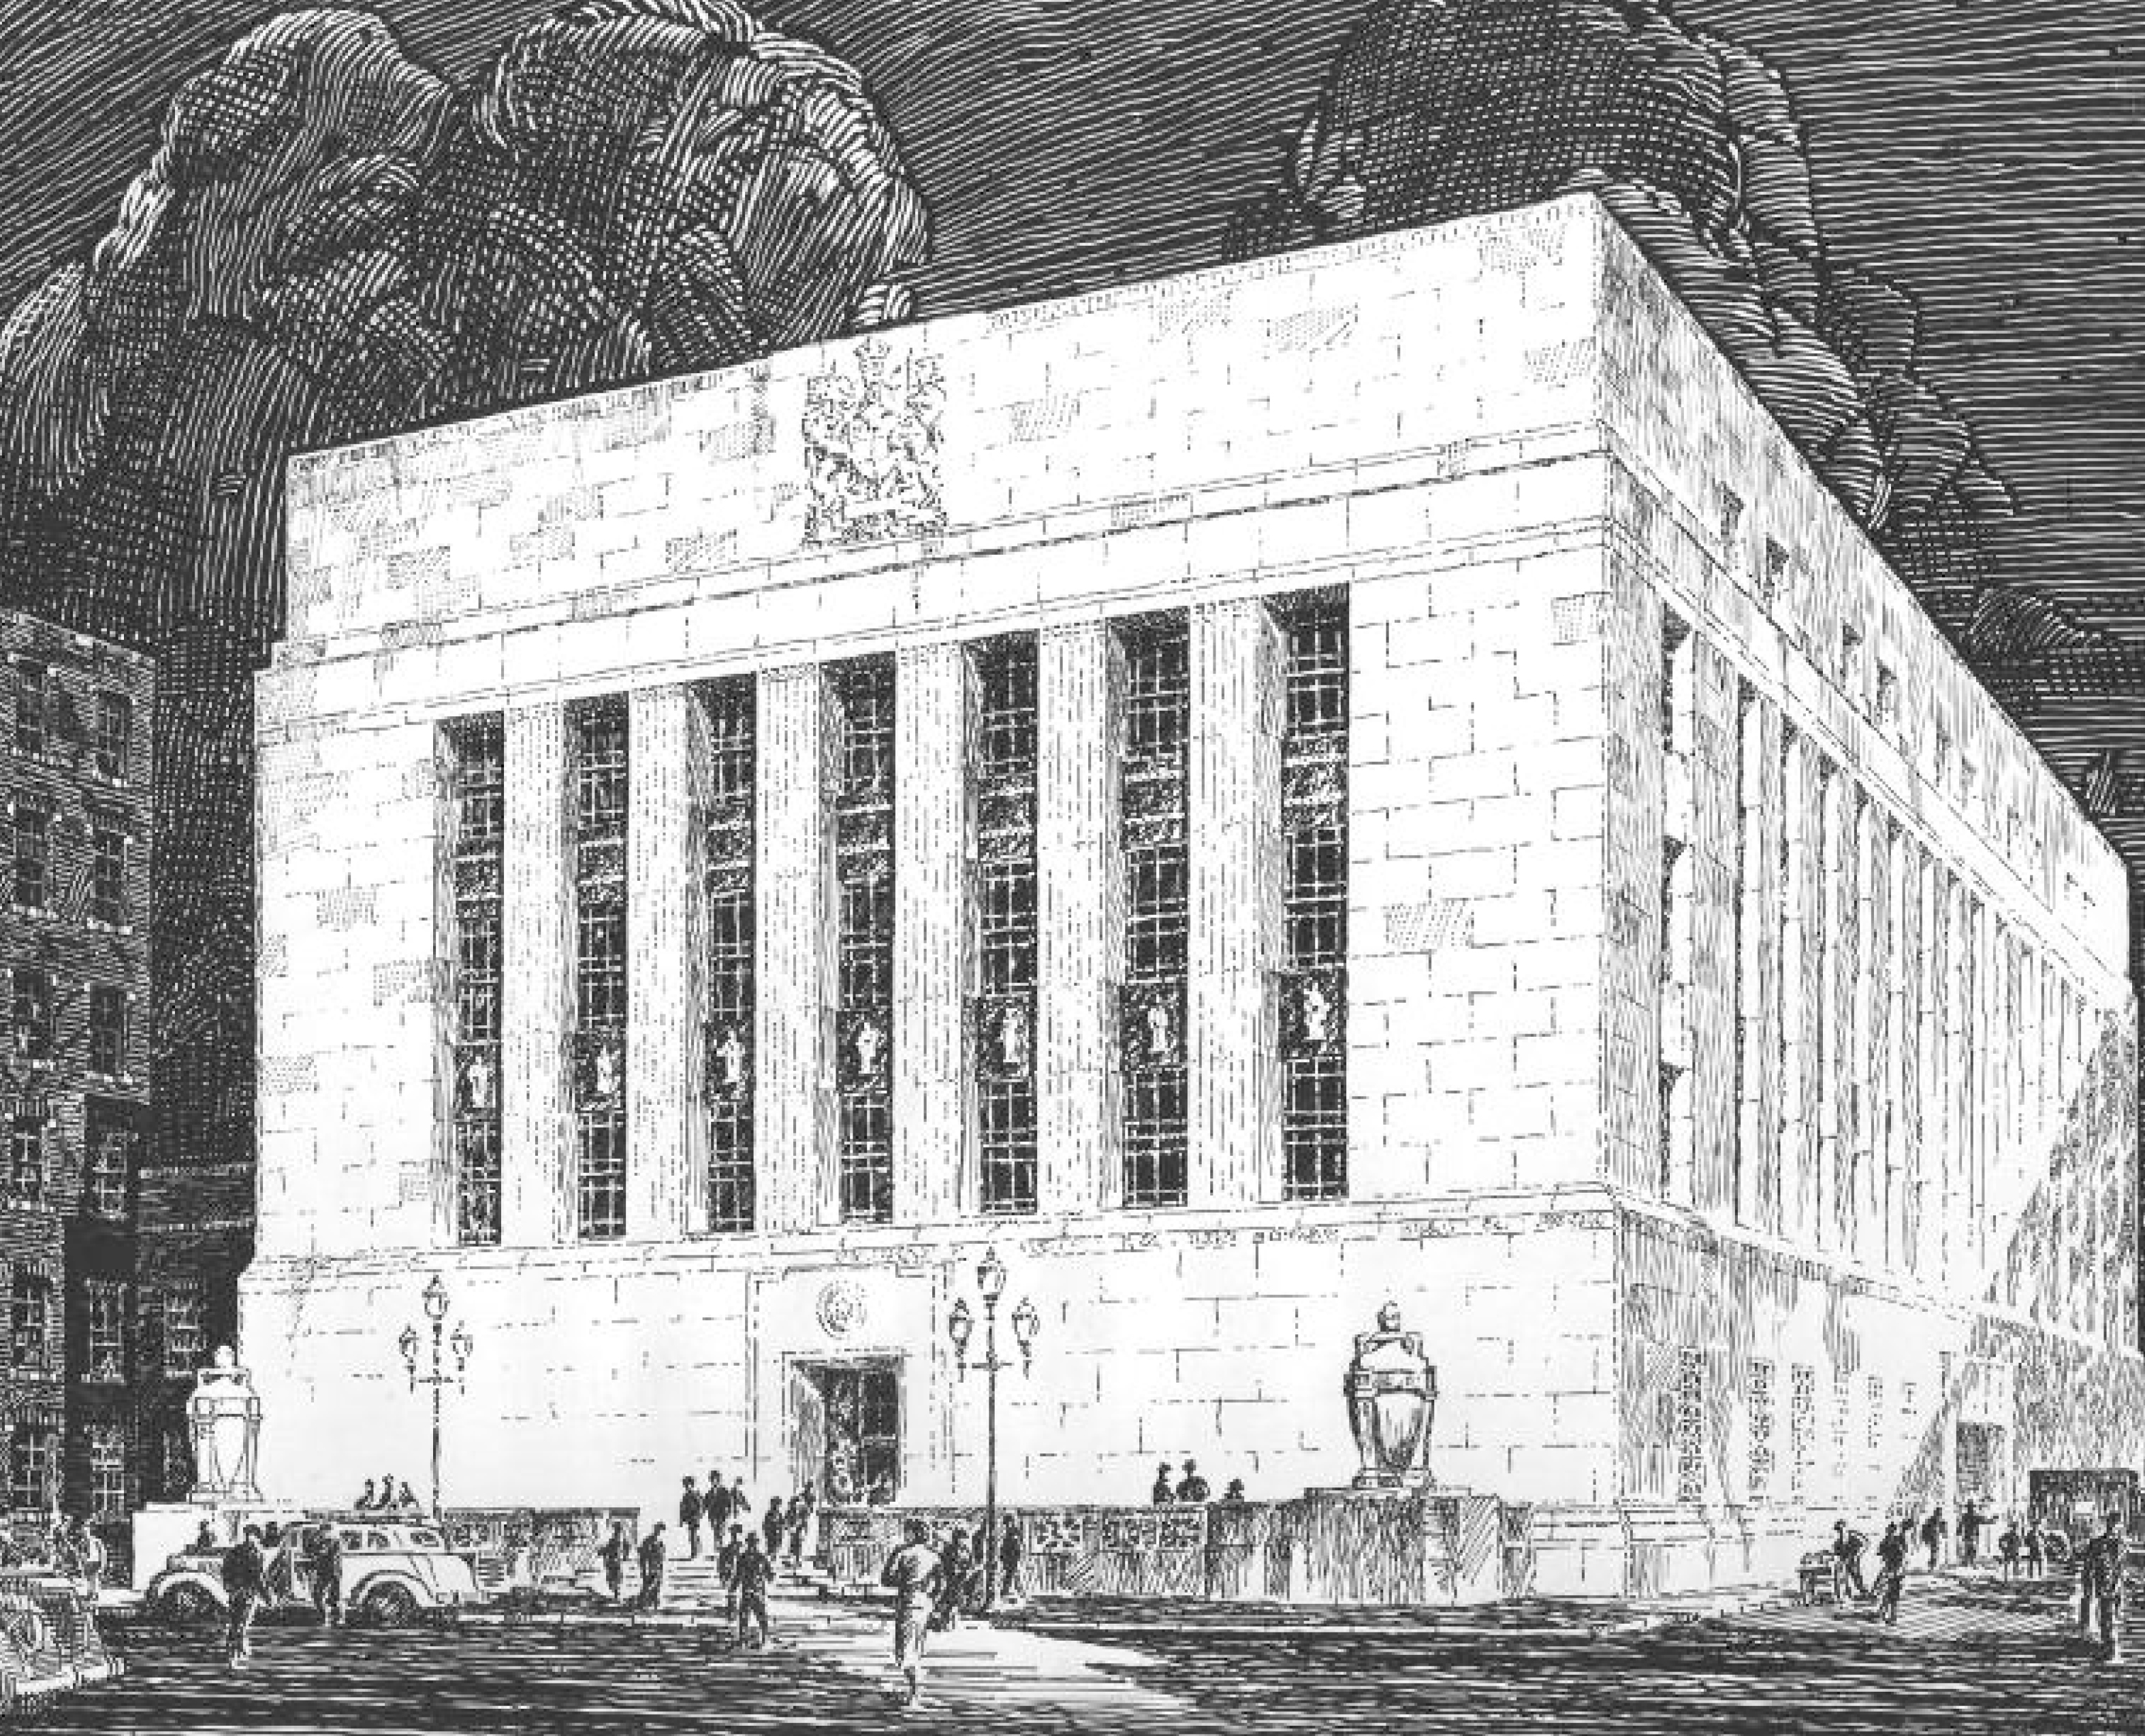 Proposed 1937 design by Marani, Lawson & Morris and S.G. Davenport, Associated Architects